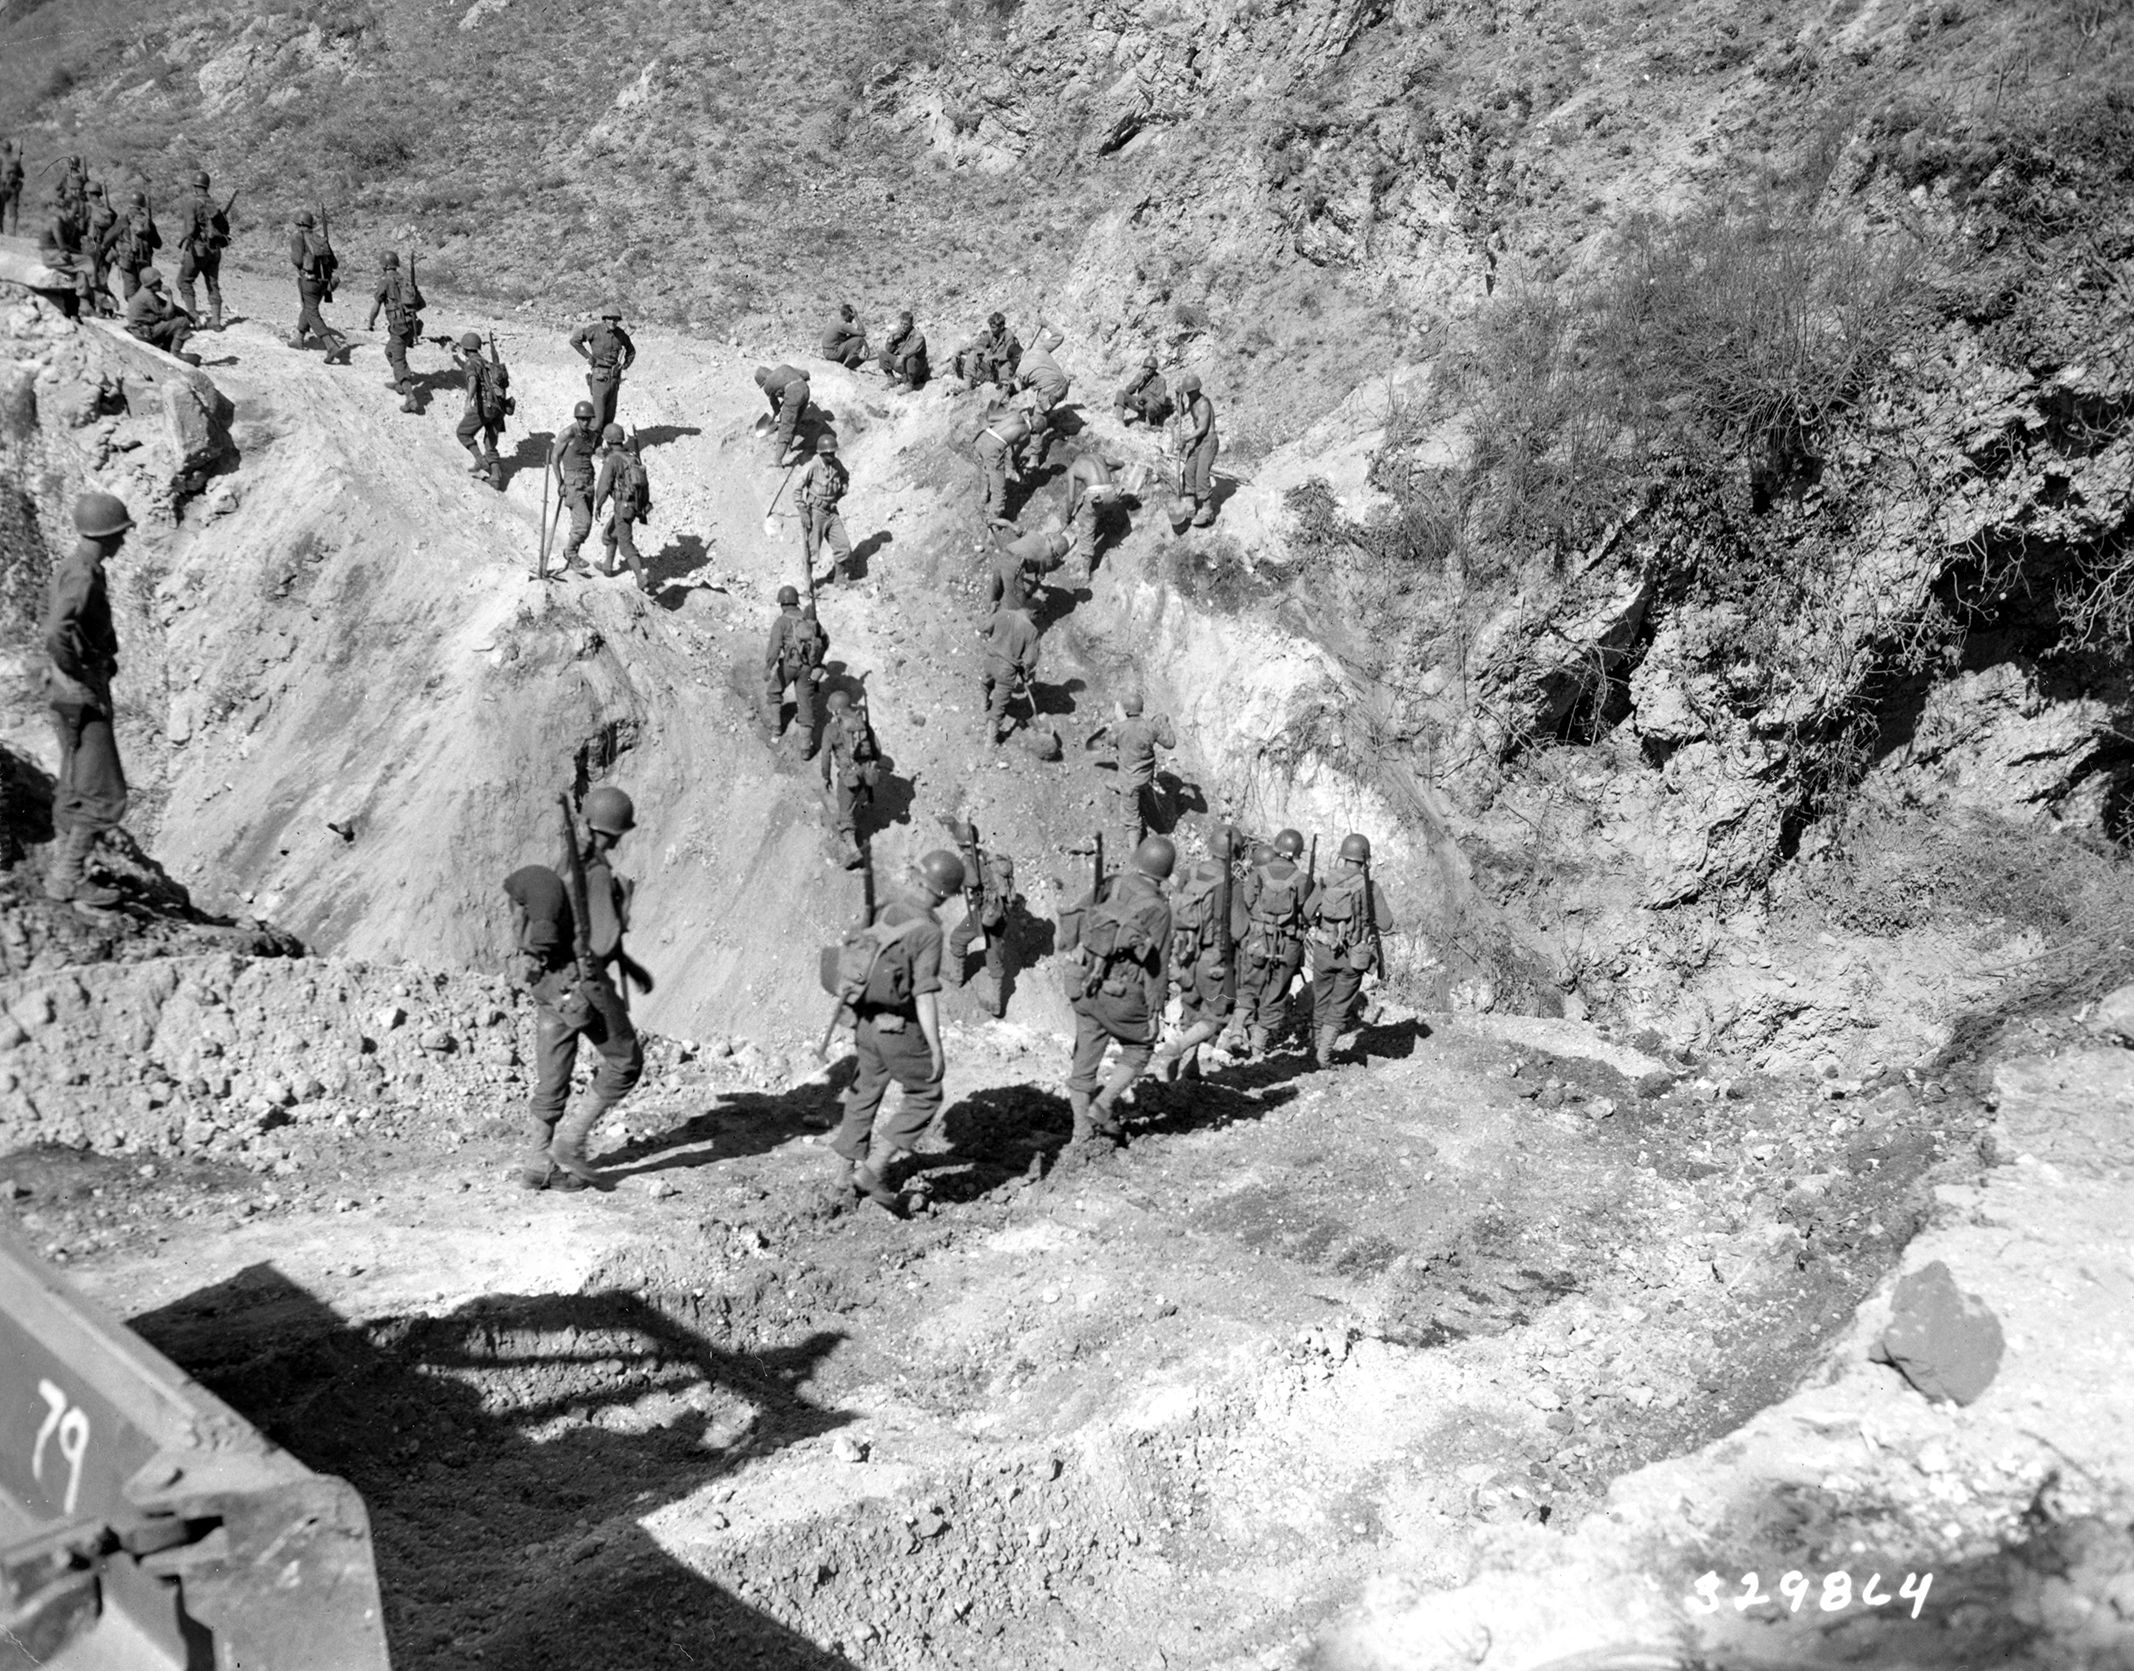 The airborne jump in the vicinity of Avellino was widely dispersed, and the difficult terrain contributed to the confusion and early breakdown of unit cohesion. The paratroopers of the 509th Parachute Infantry Battalion spent days behind enemy lines fighting for their lives against German forces. 